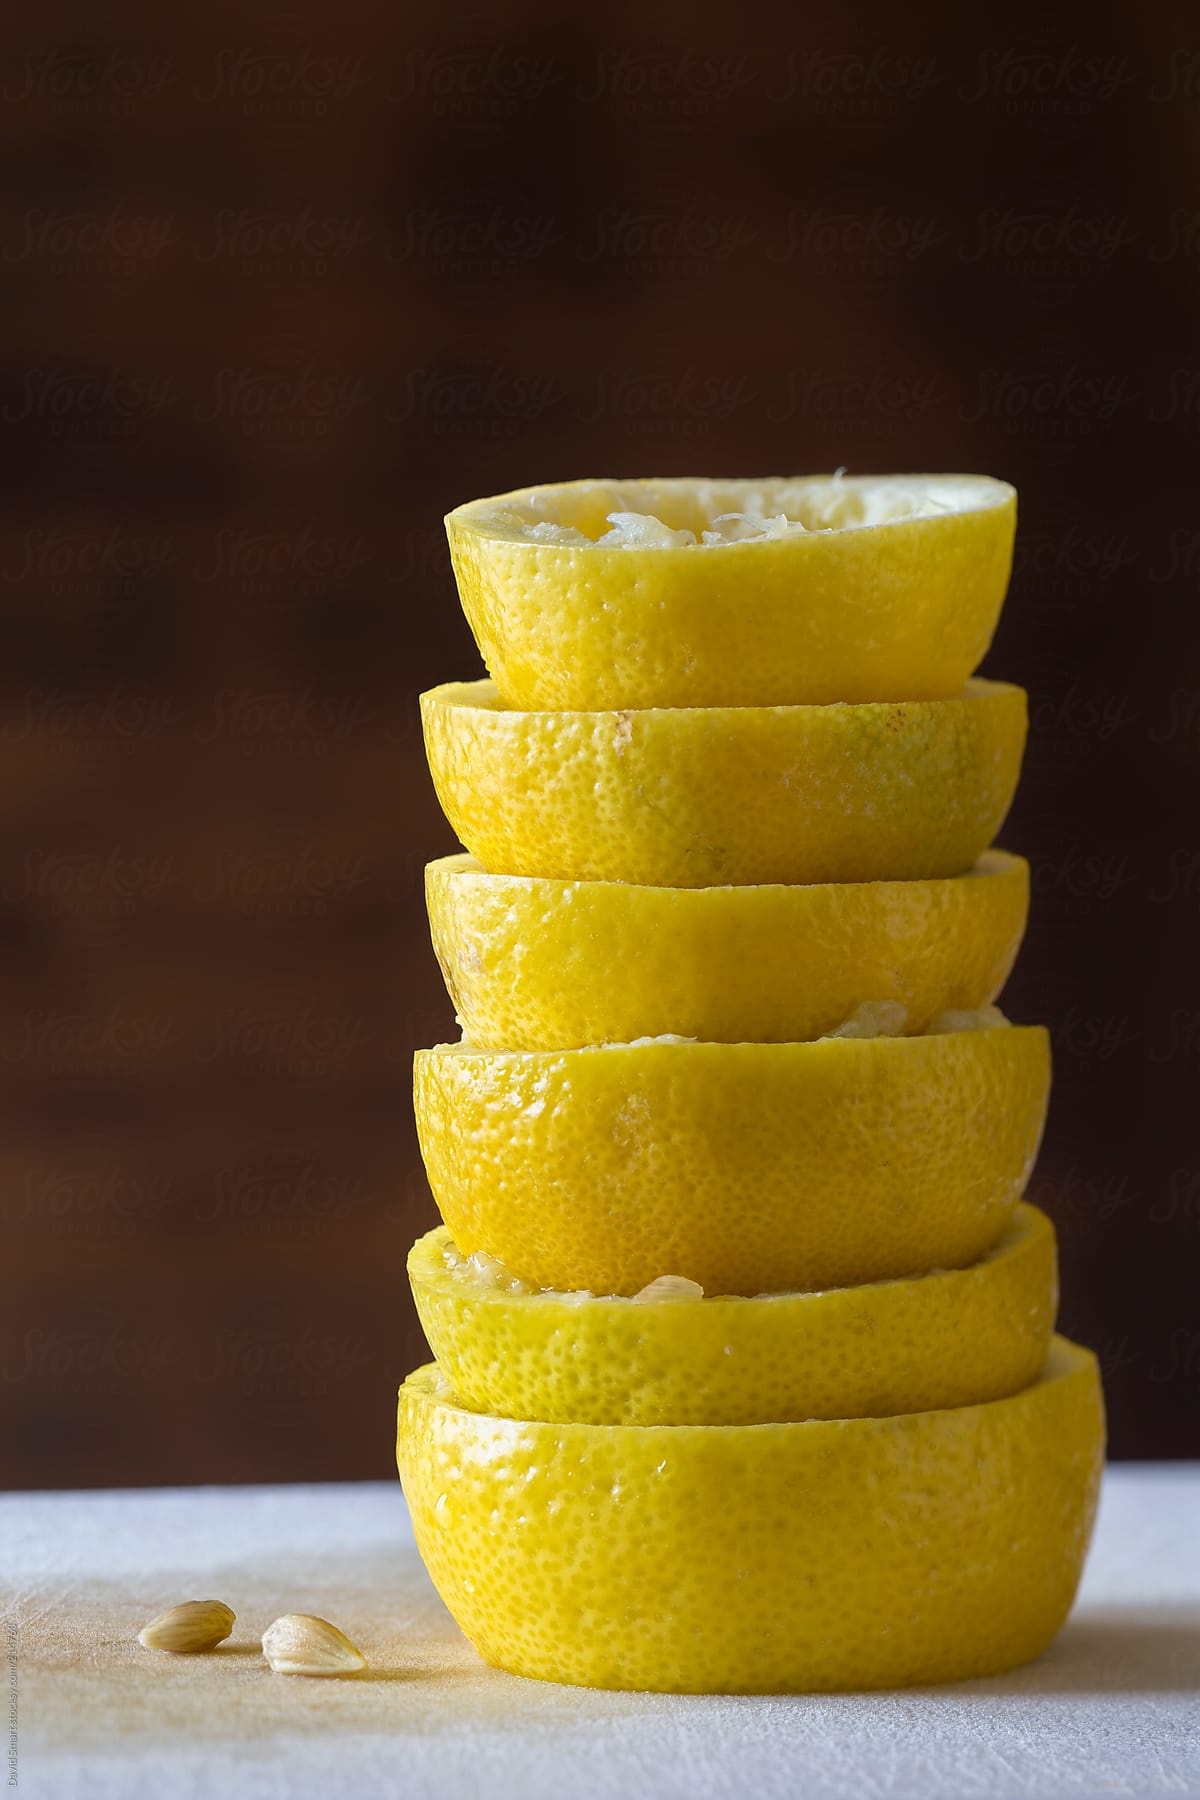 Stack of lemons that have been squeezed for lemonade